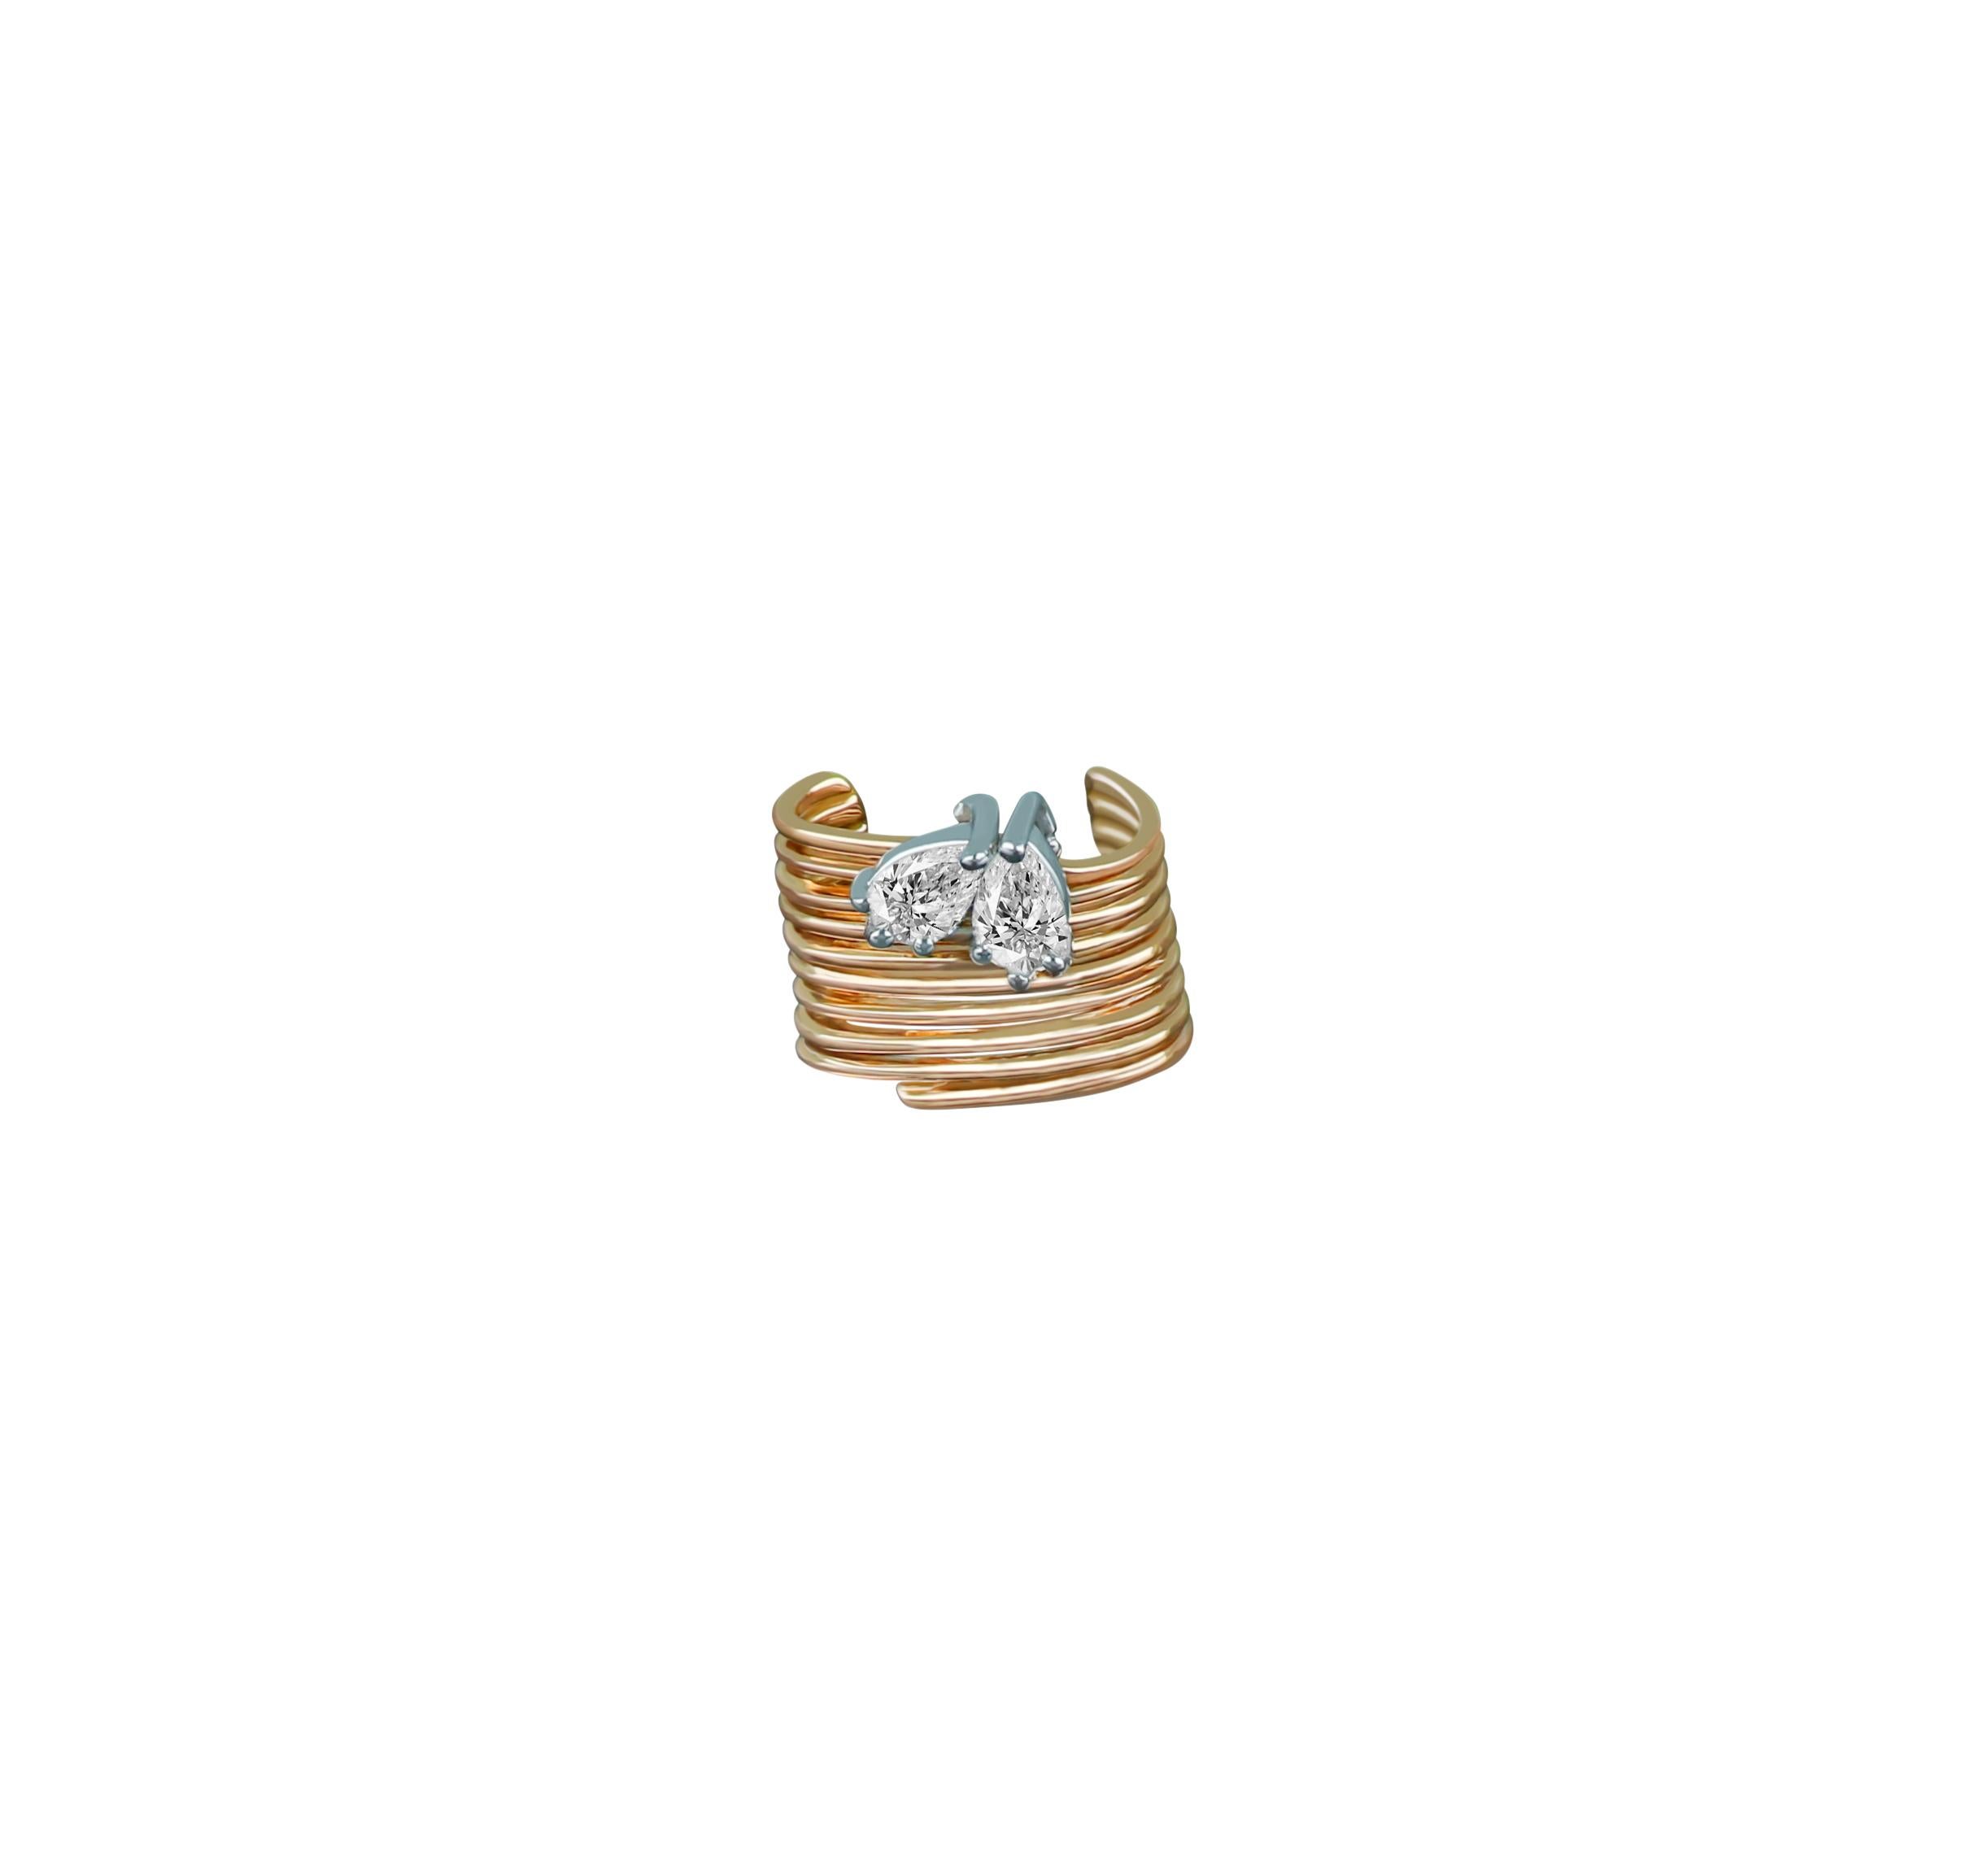 The heart motif in this 18 karat gold ear cuff is timeless romantic. Presented in 0.285 ct pear cut diamonds of extraordinary beauty, this rose gold creation is a symbolic take on Amwaj iconic ear cuffs. Crafted in minimalist setting, the purity of